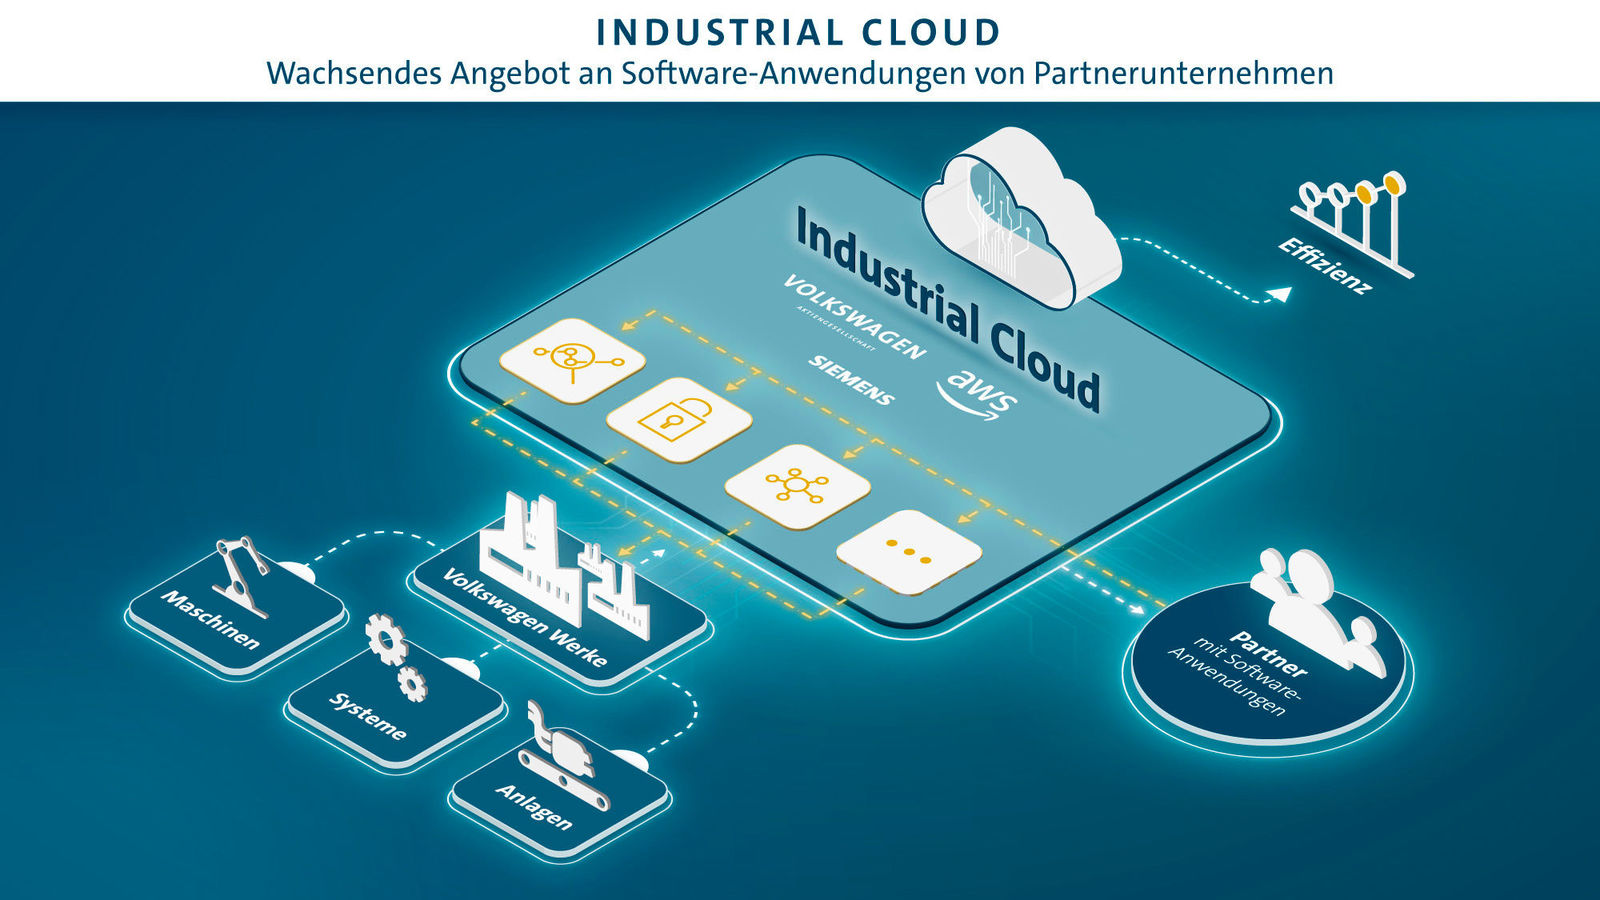 Story: Fully integrated: Volkswagen builds Industrial Cloud for all plants